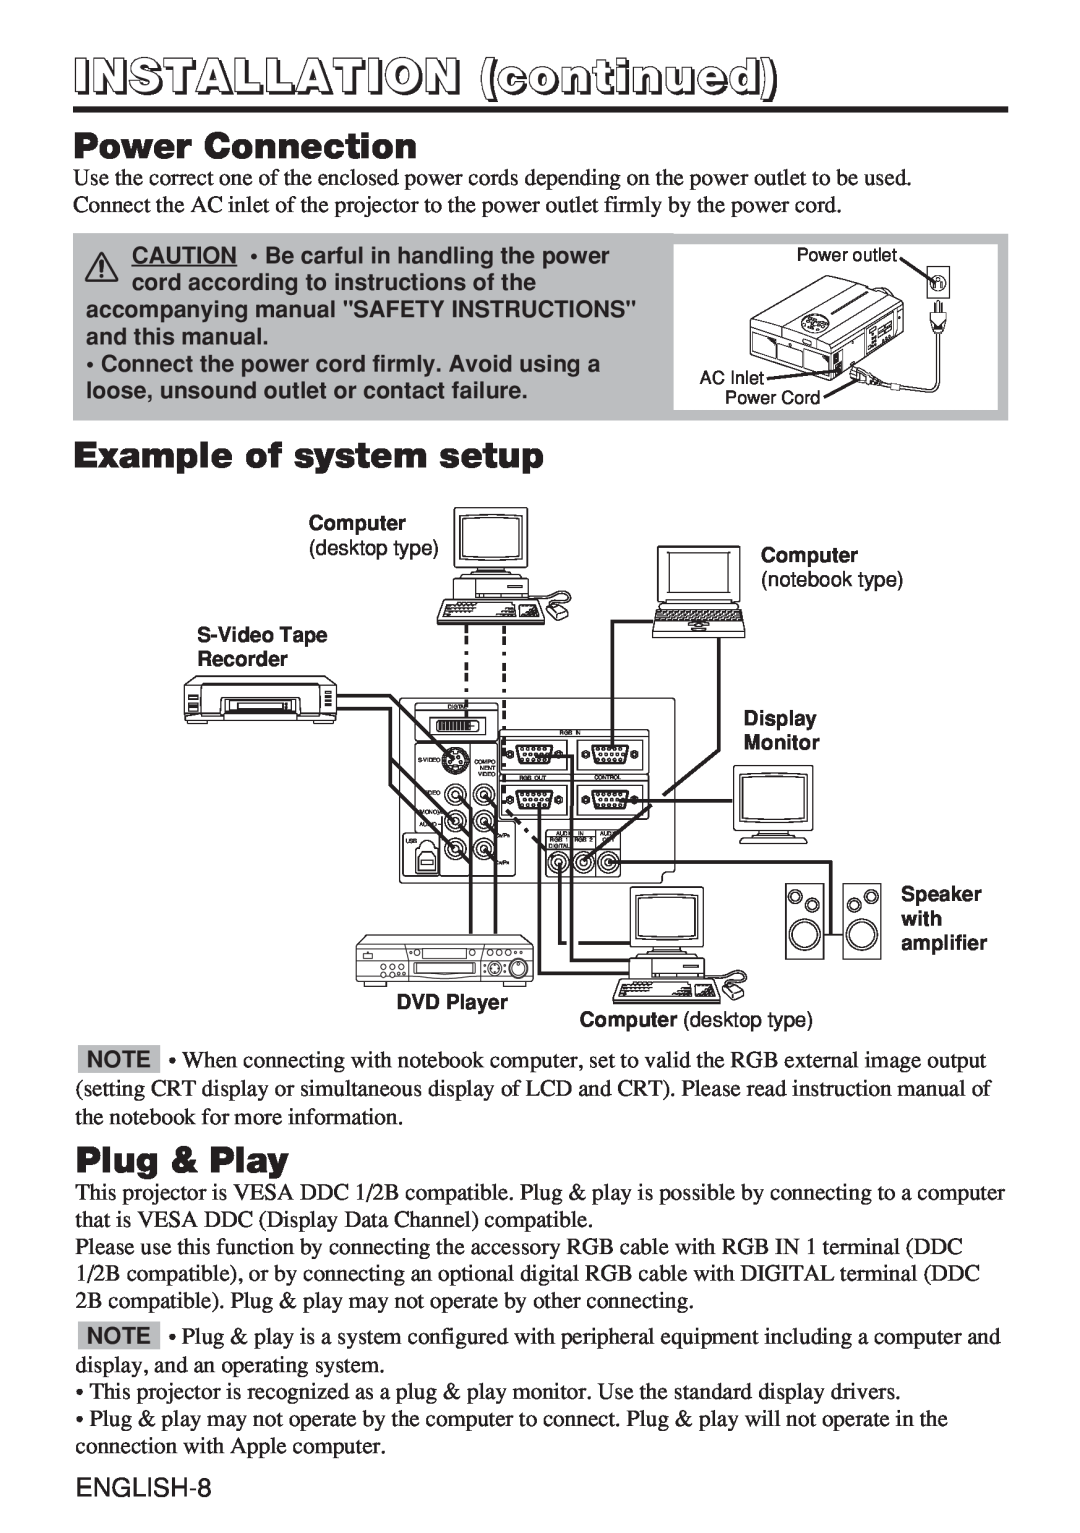 Hitachi CP-X980W user manual Power Connection, Example of system setup, Plug & Play, INSTALLATION continued, ENGLISH-8 